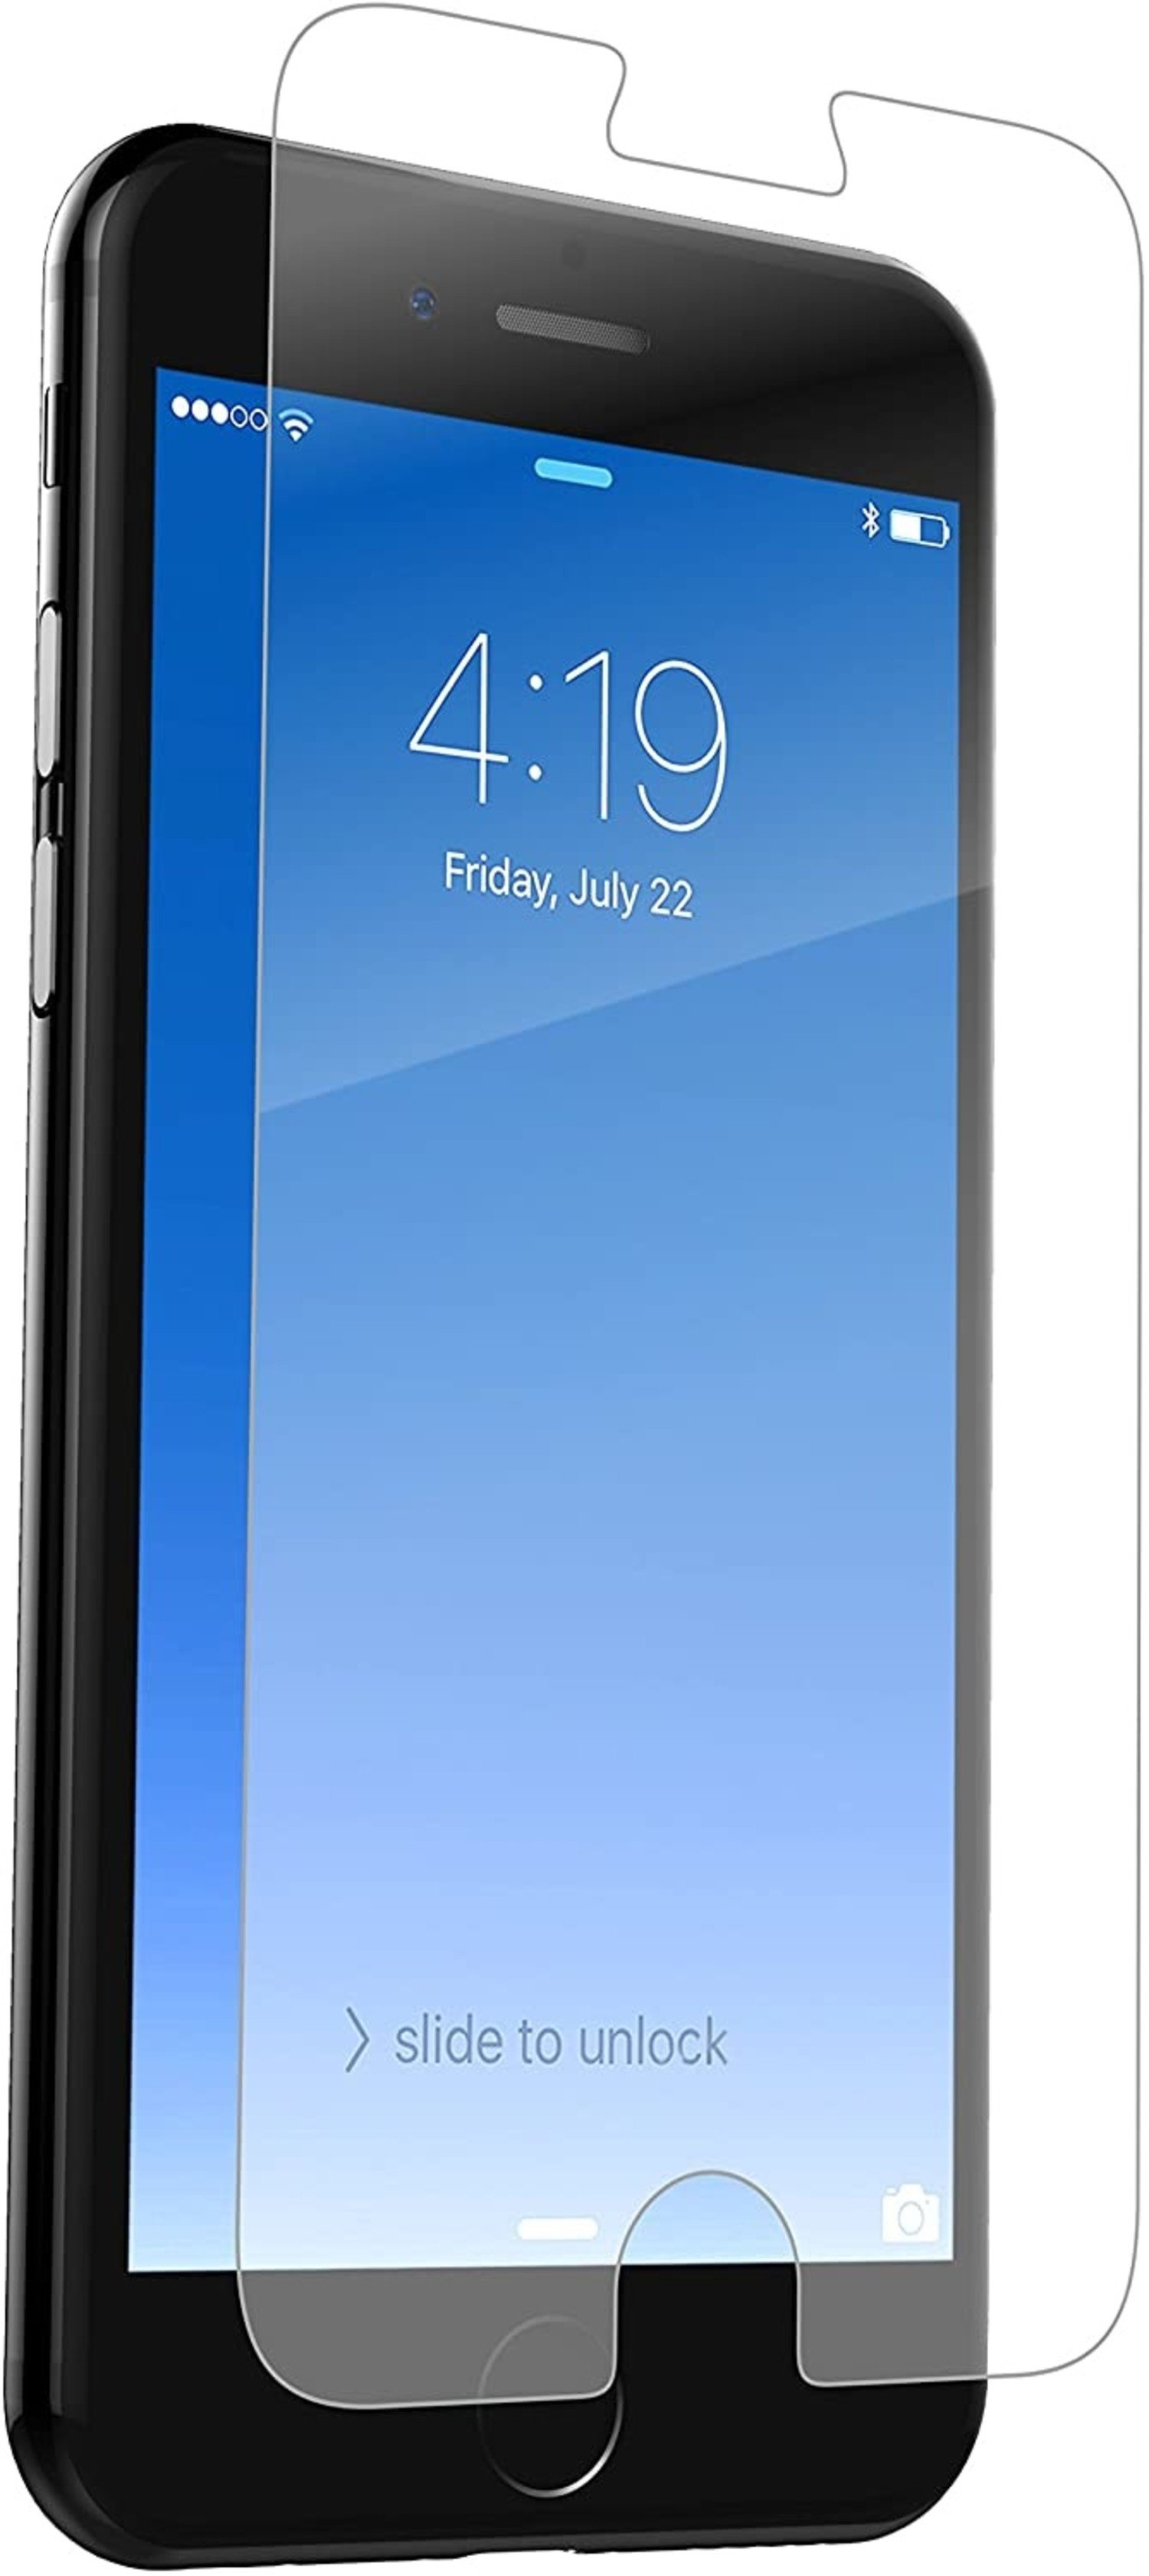 Genuine Zagg iFrogz GlassGuard Screen Protector for iPhone 6 Plus / 6s Plus  5.5 for sale online